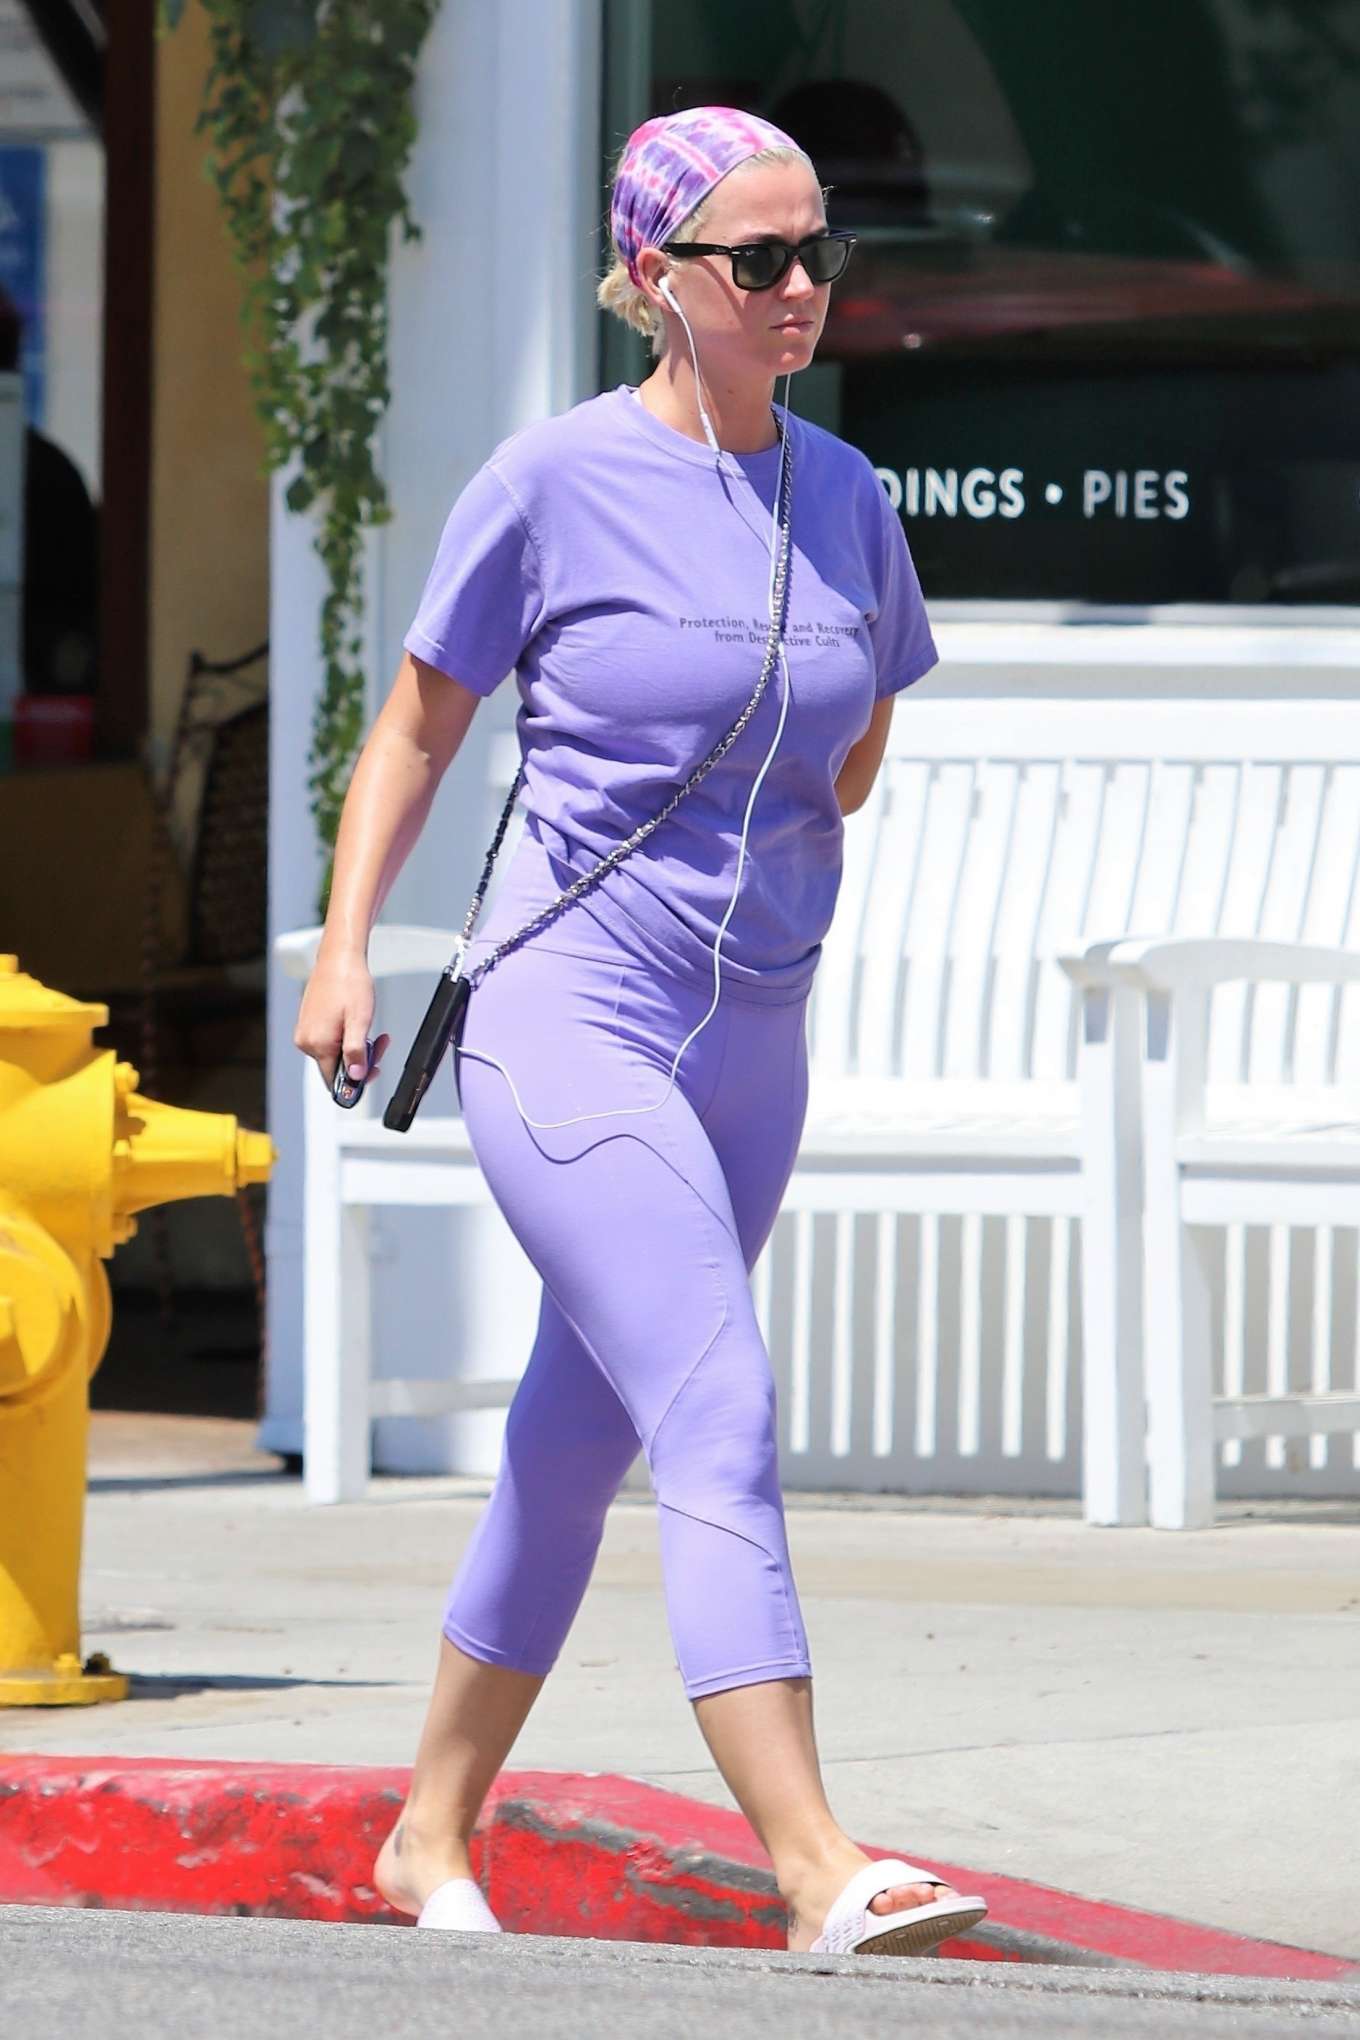 Index of /wp-content/uploads/photos/katy-perry/in-purple-outfit-out-in-la